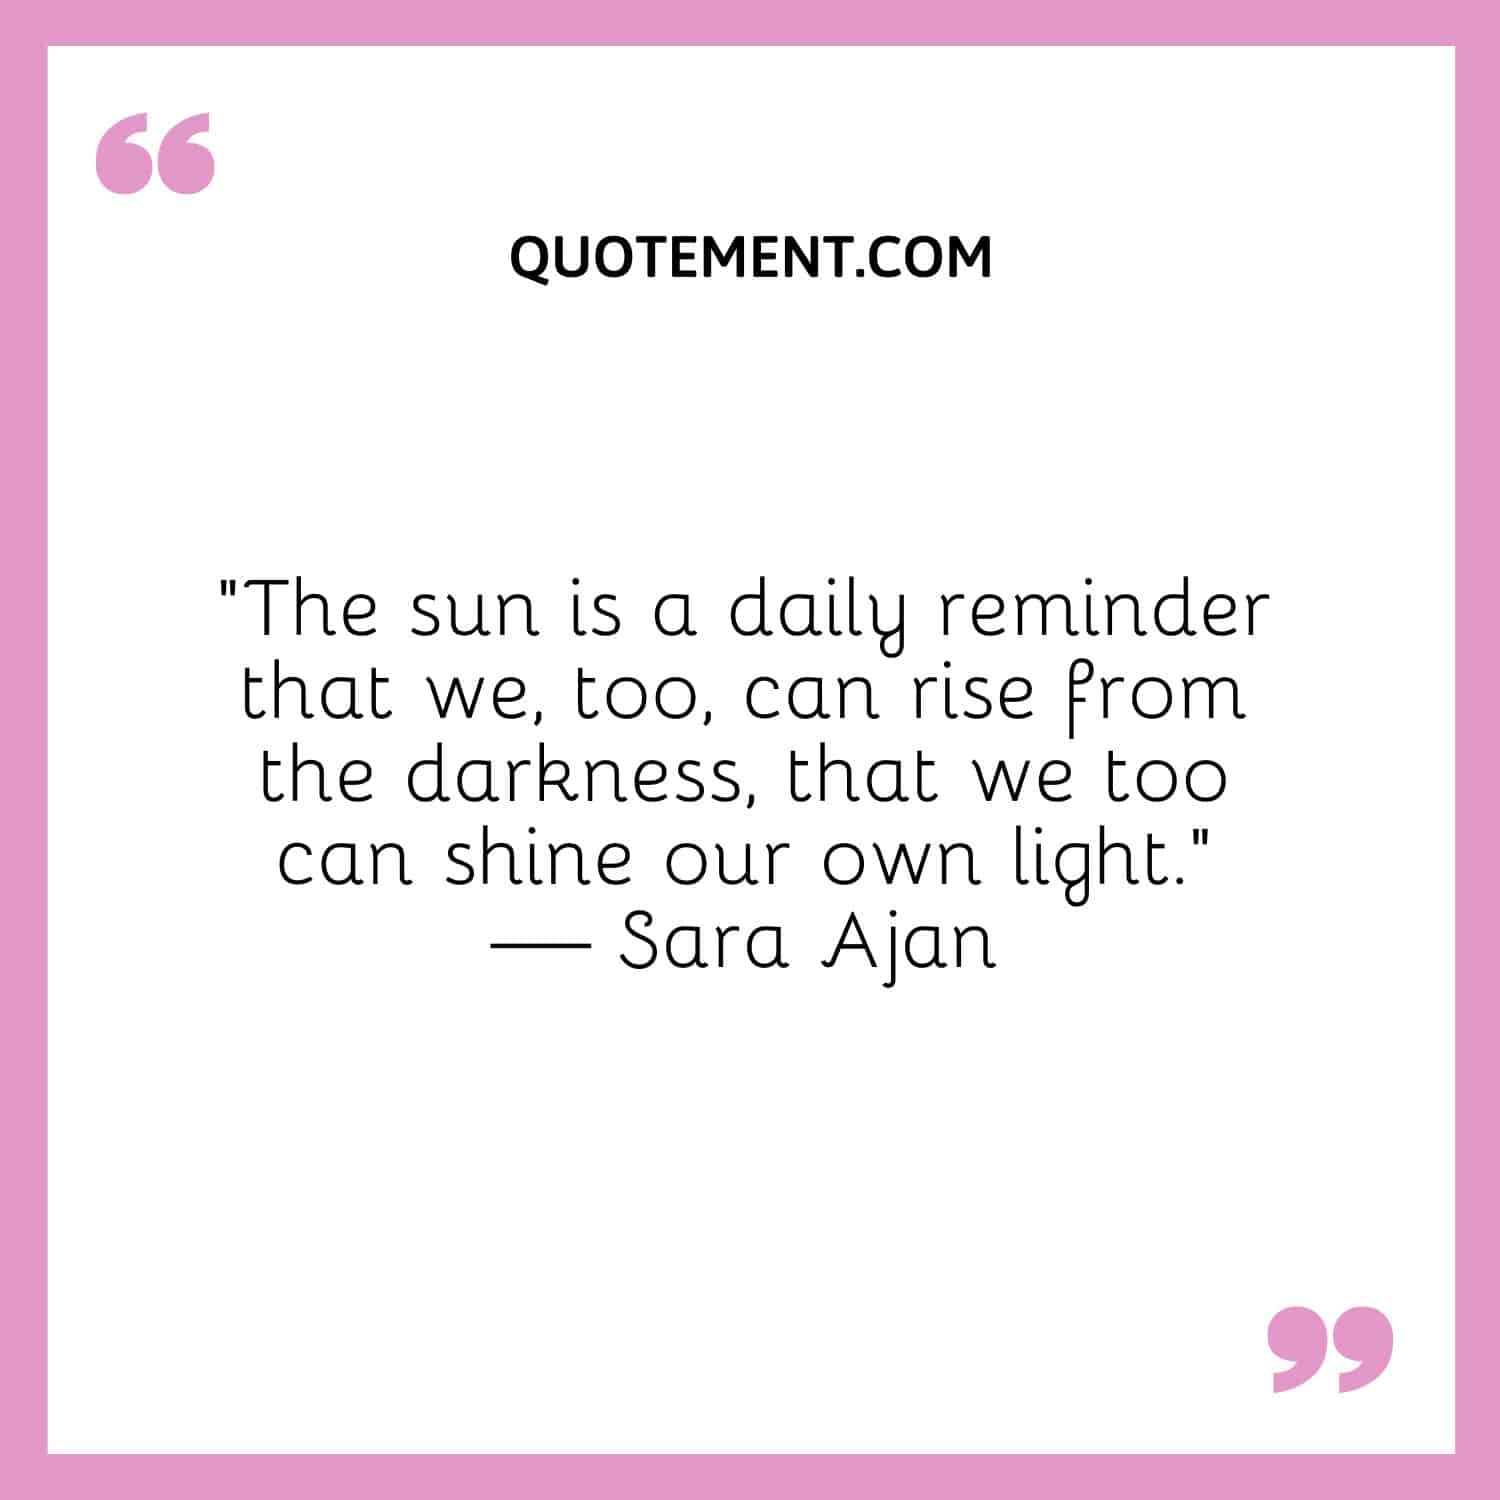 The sun is a daily reminder that we, too, can rise from the darkness